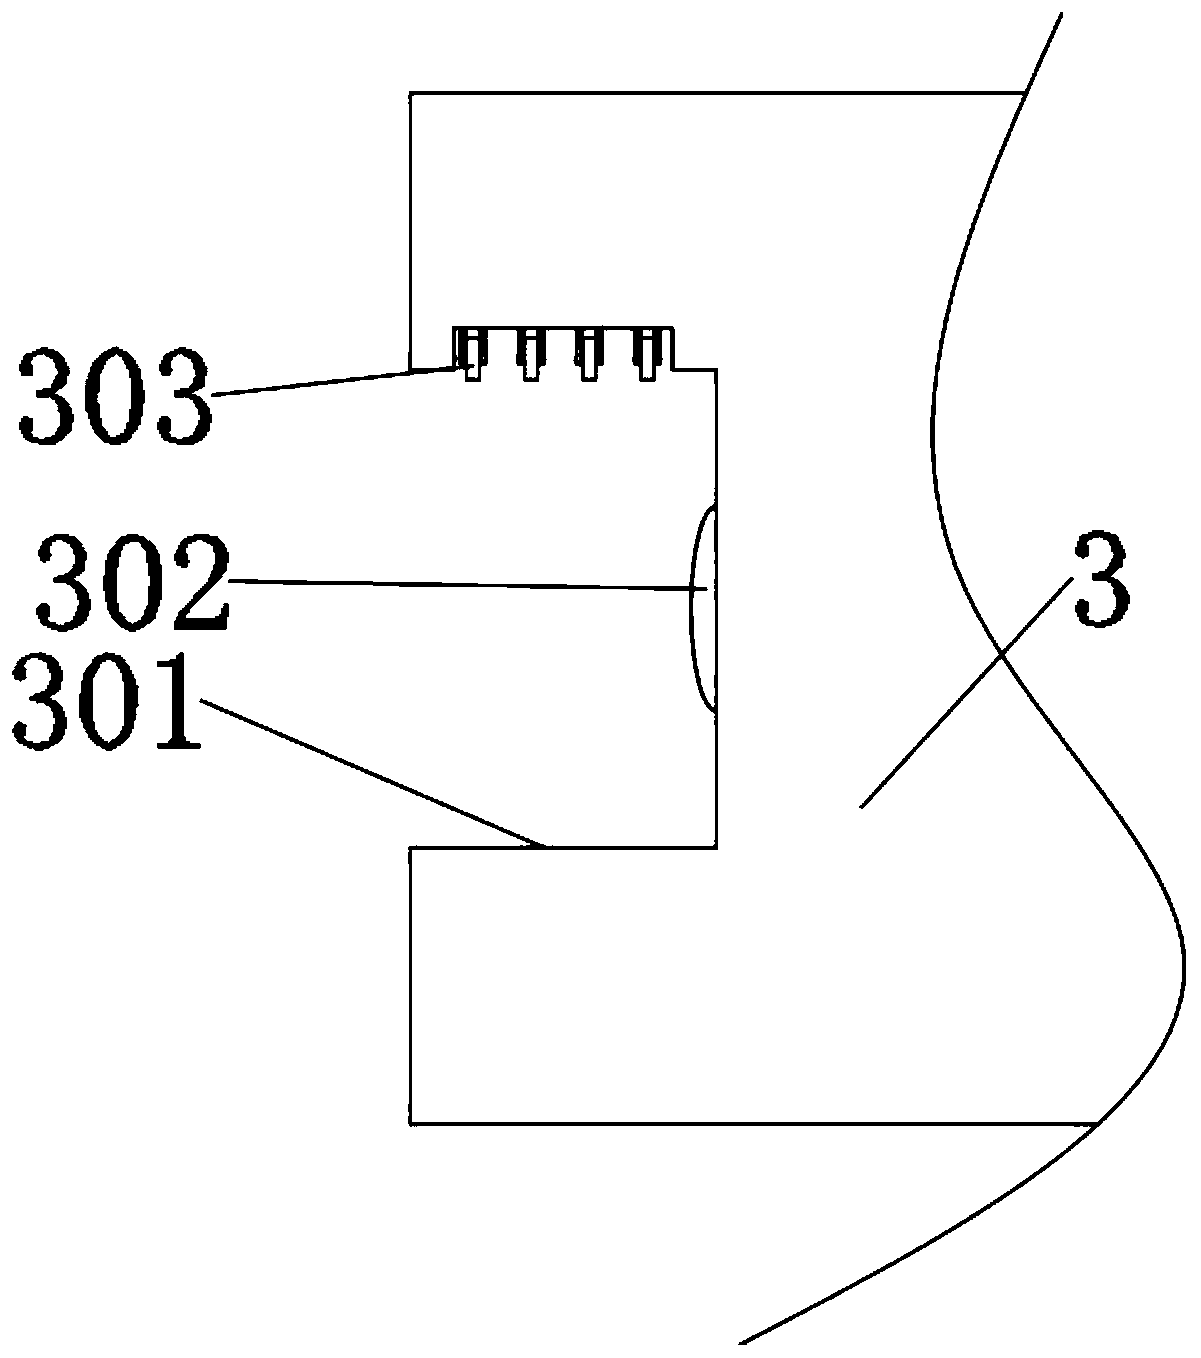 Adjustable sliding type monitoring and alarming device between corridors